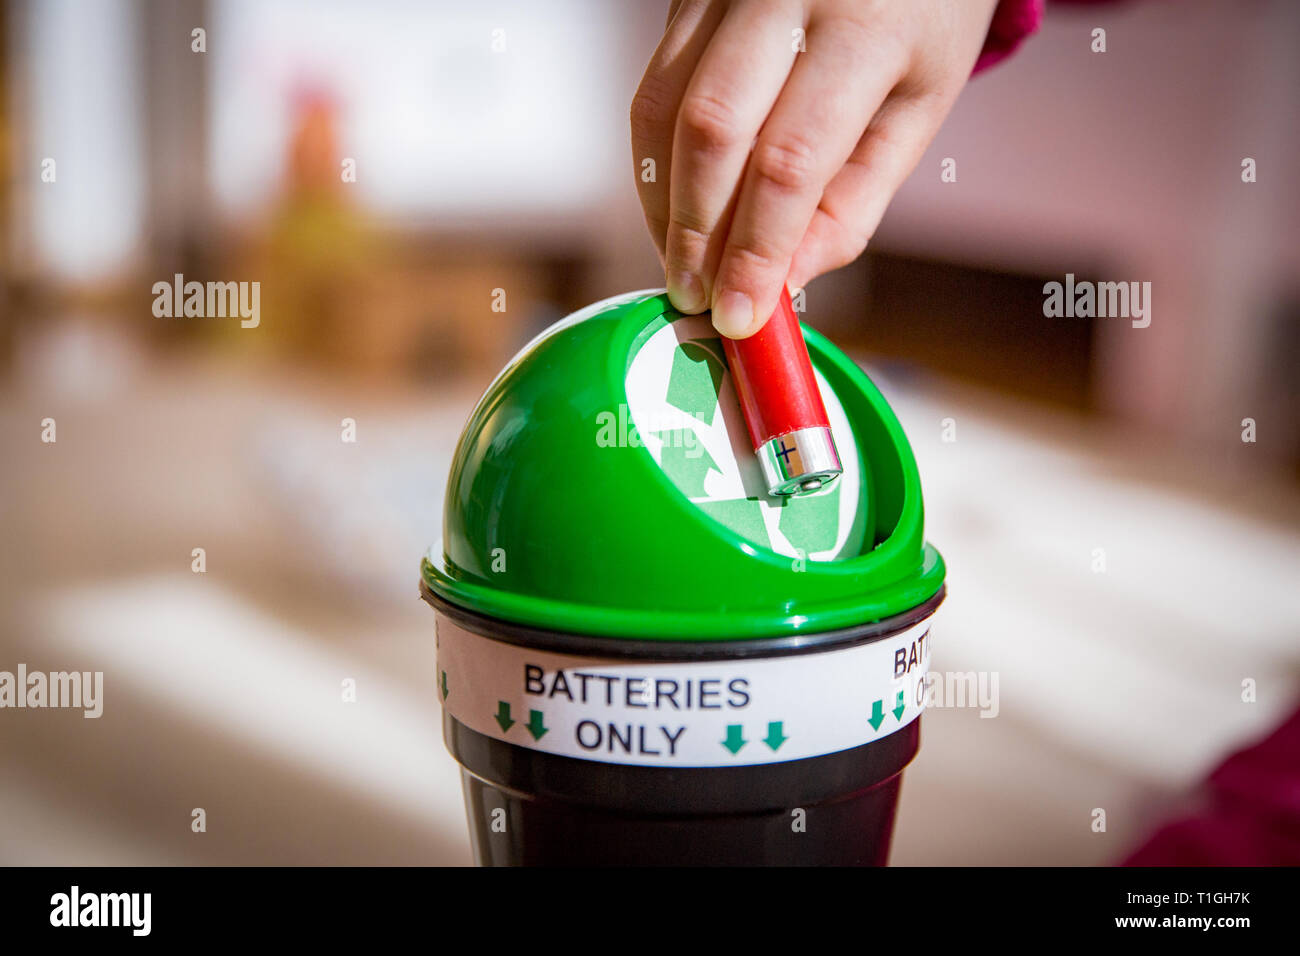 Little girl putting used batteries into recycling box at home. Child in the house room separating waste. Batteries Only. Stock Photo